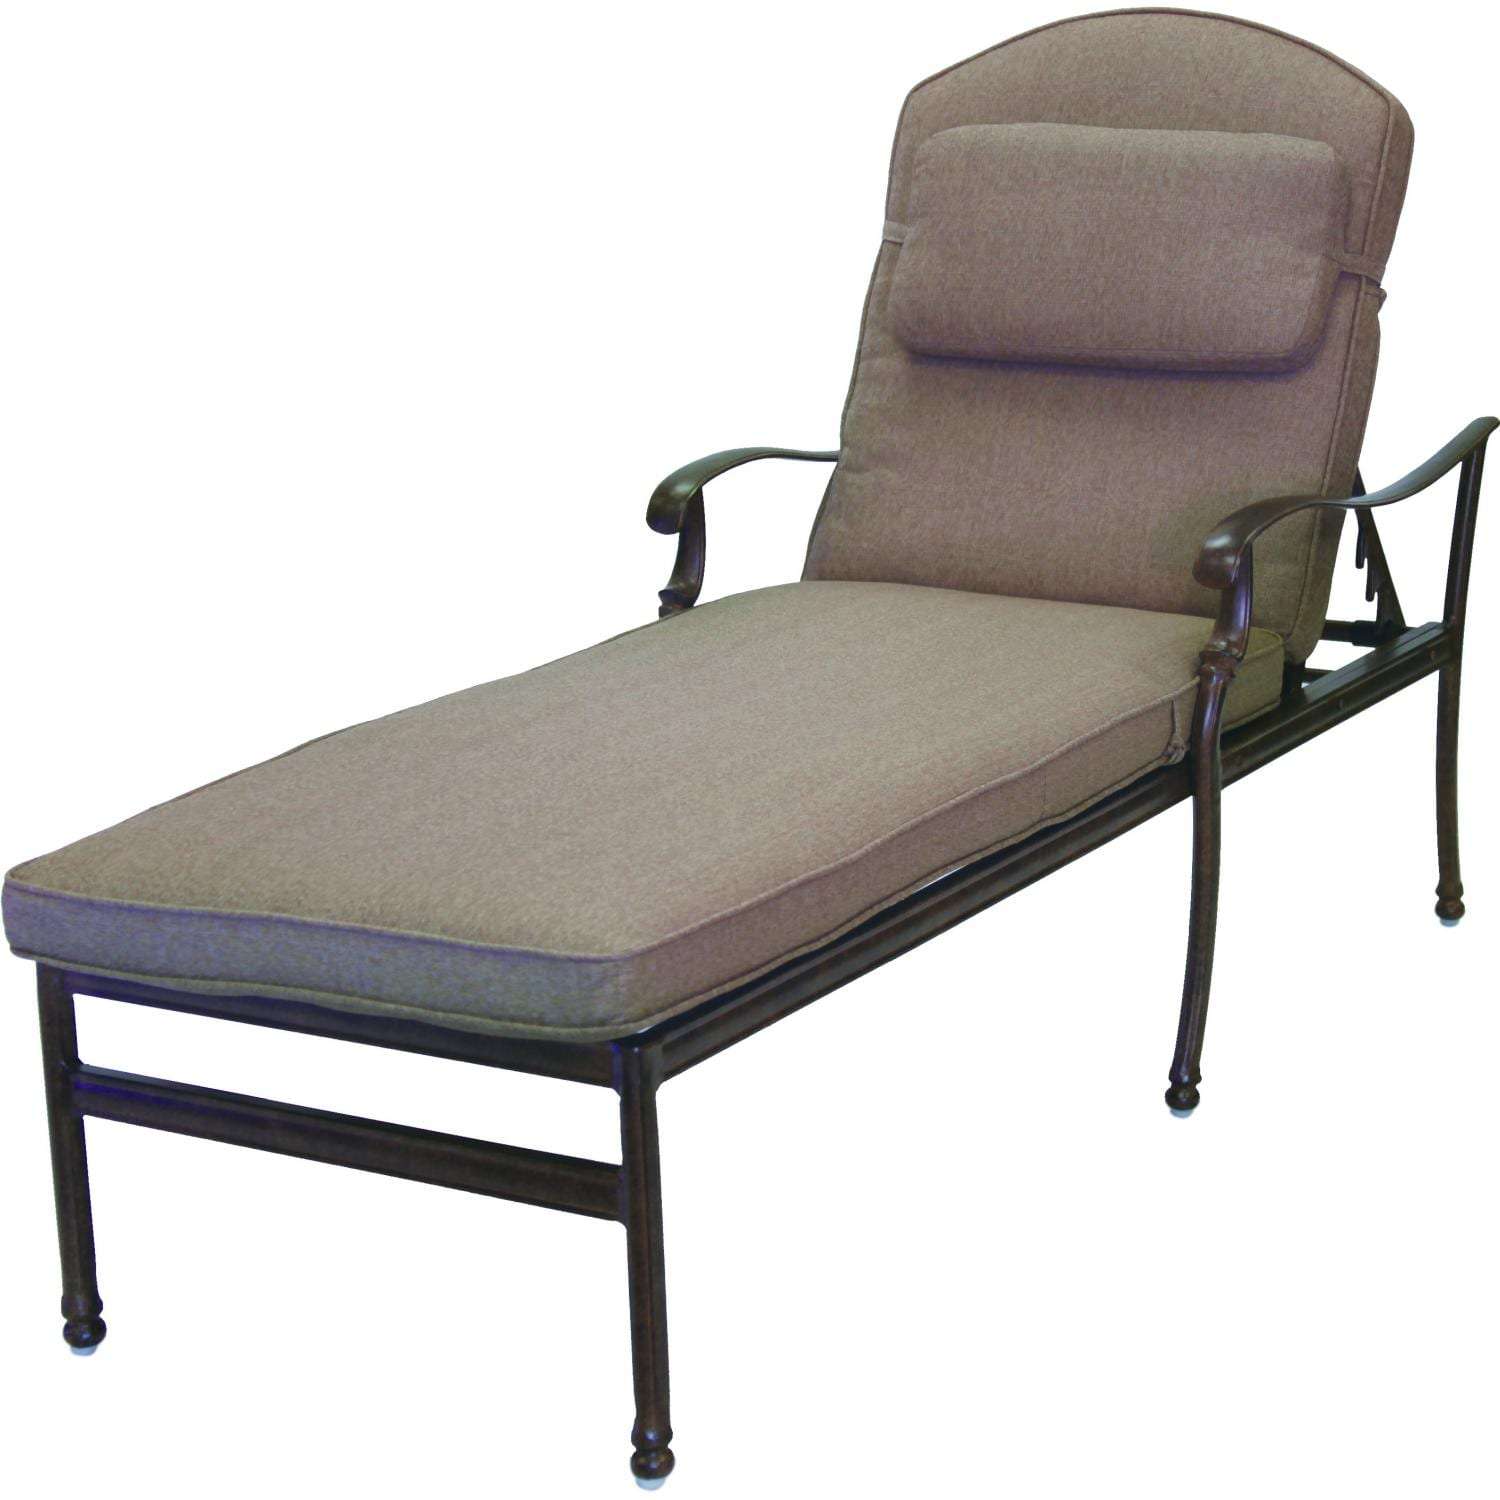 Darlee Florence Cast Aluminum Patio Chaise Lounge